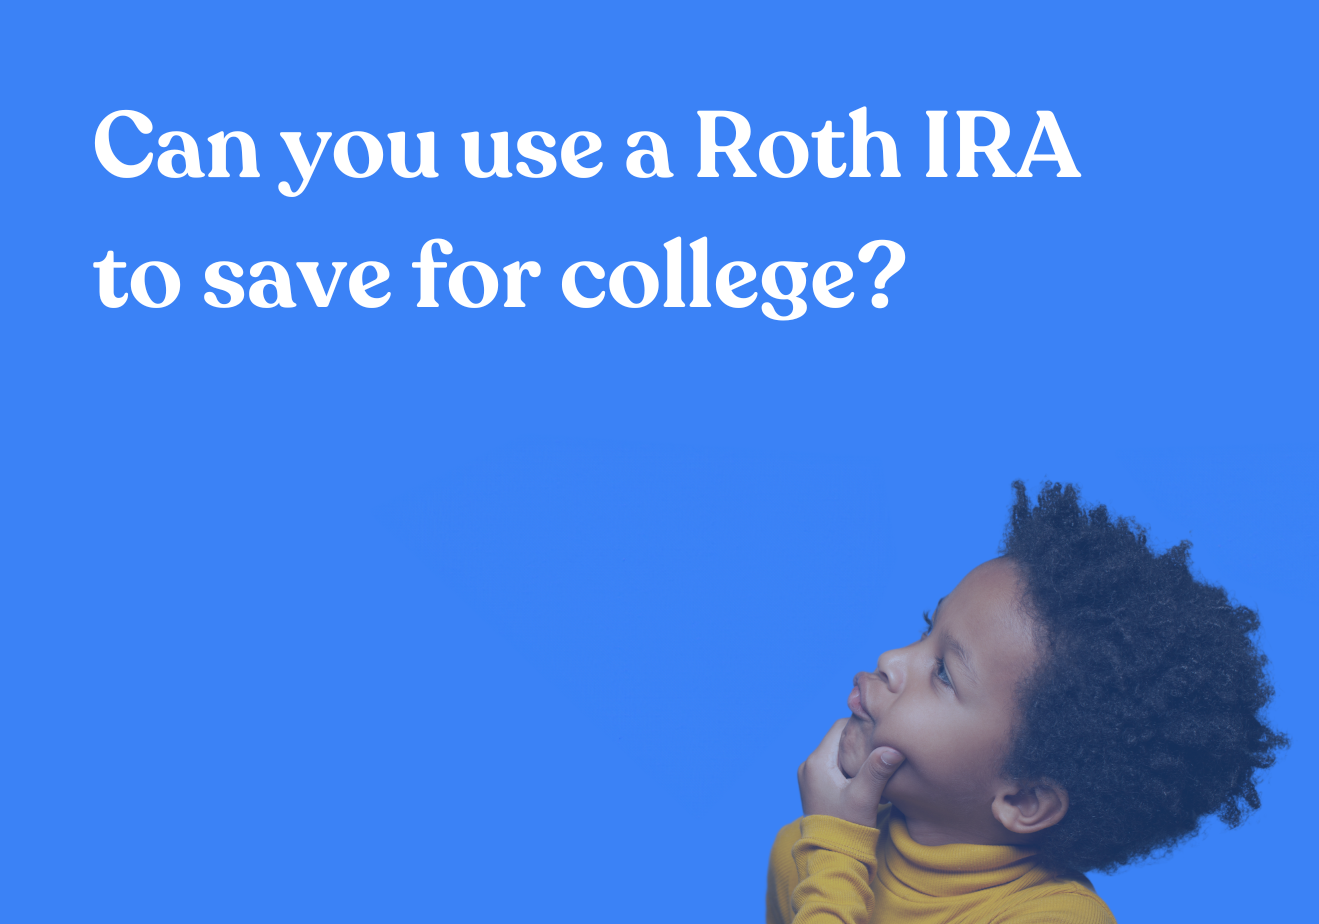 Can You use a Roth IRA to Save for College?